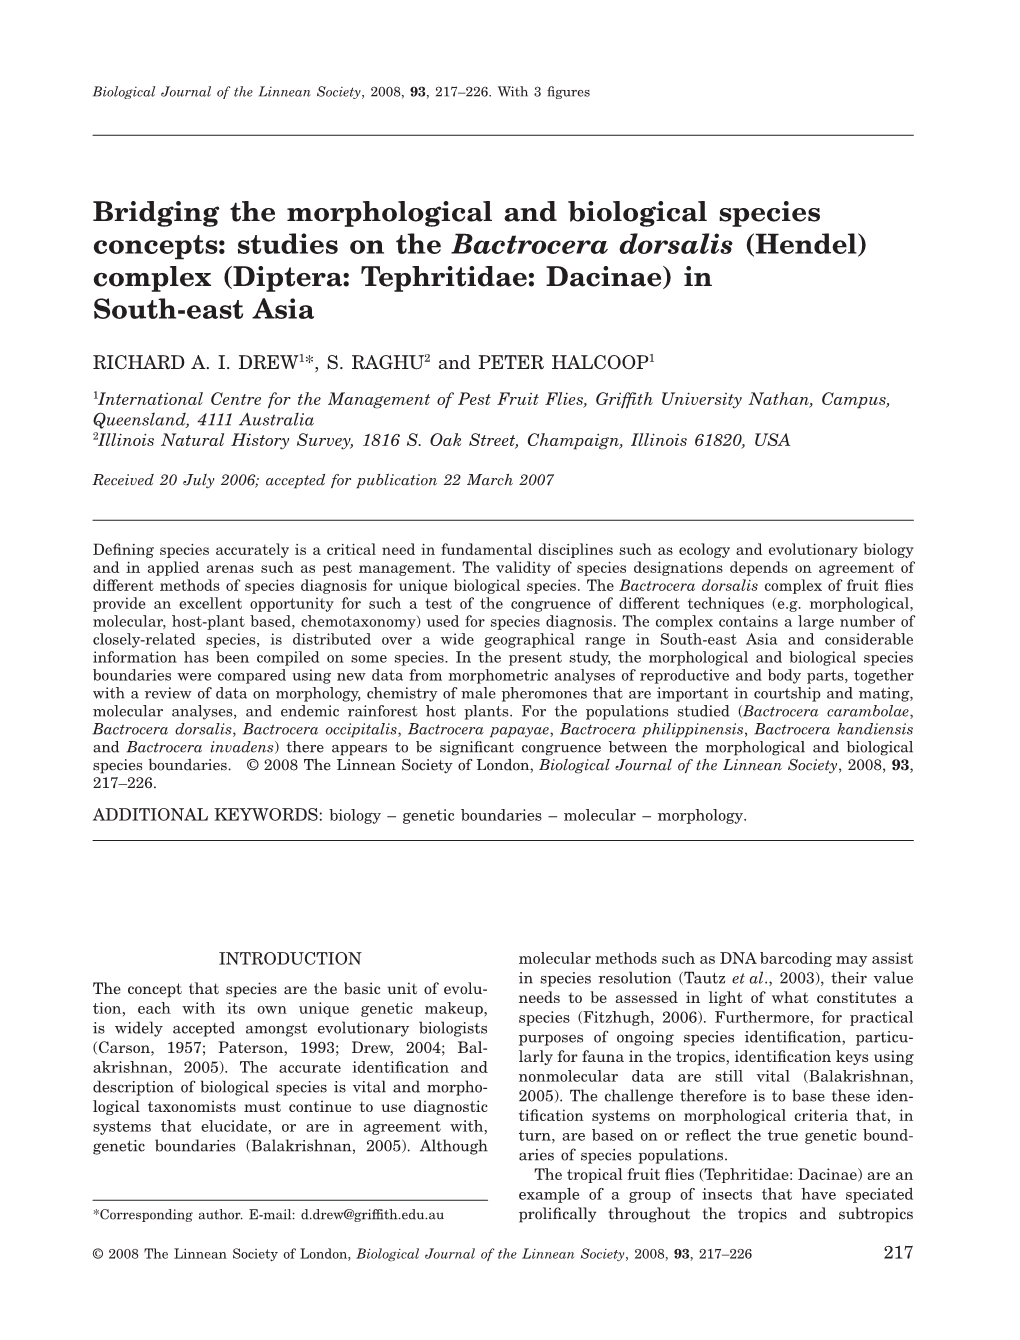 Bridging the Morphological and Biological Species Concepts: Studies on the Bactrocera Dorsalis (Hendel) Complex (Diptera: Tephritidae: Dacinae) in South-East Asia